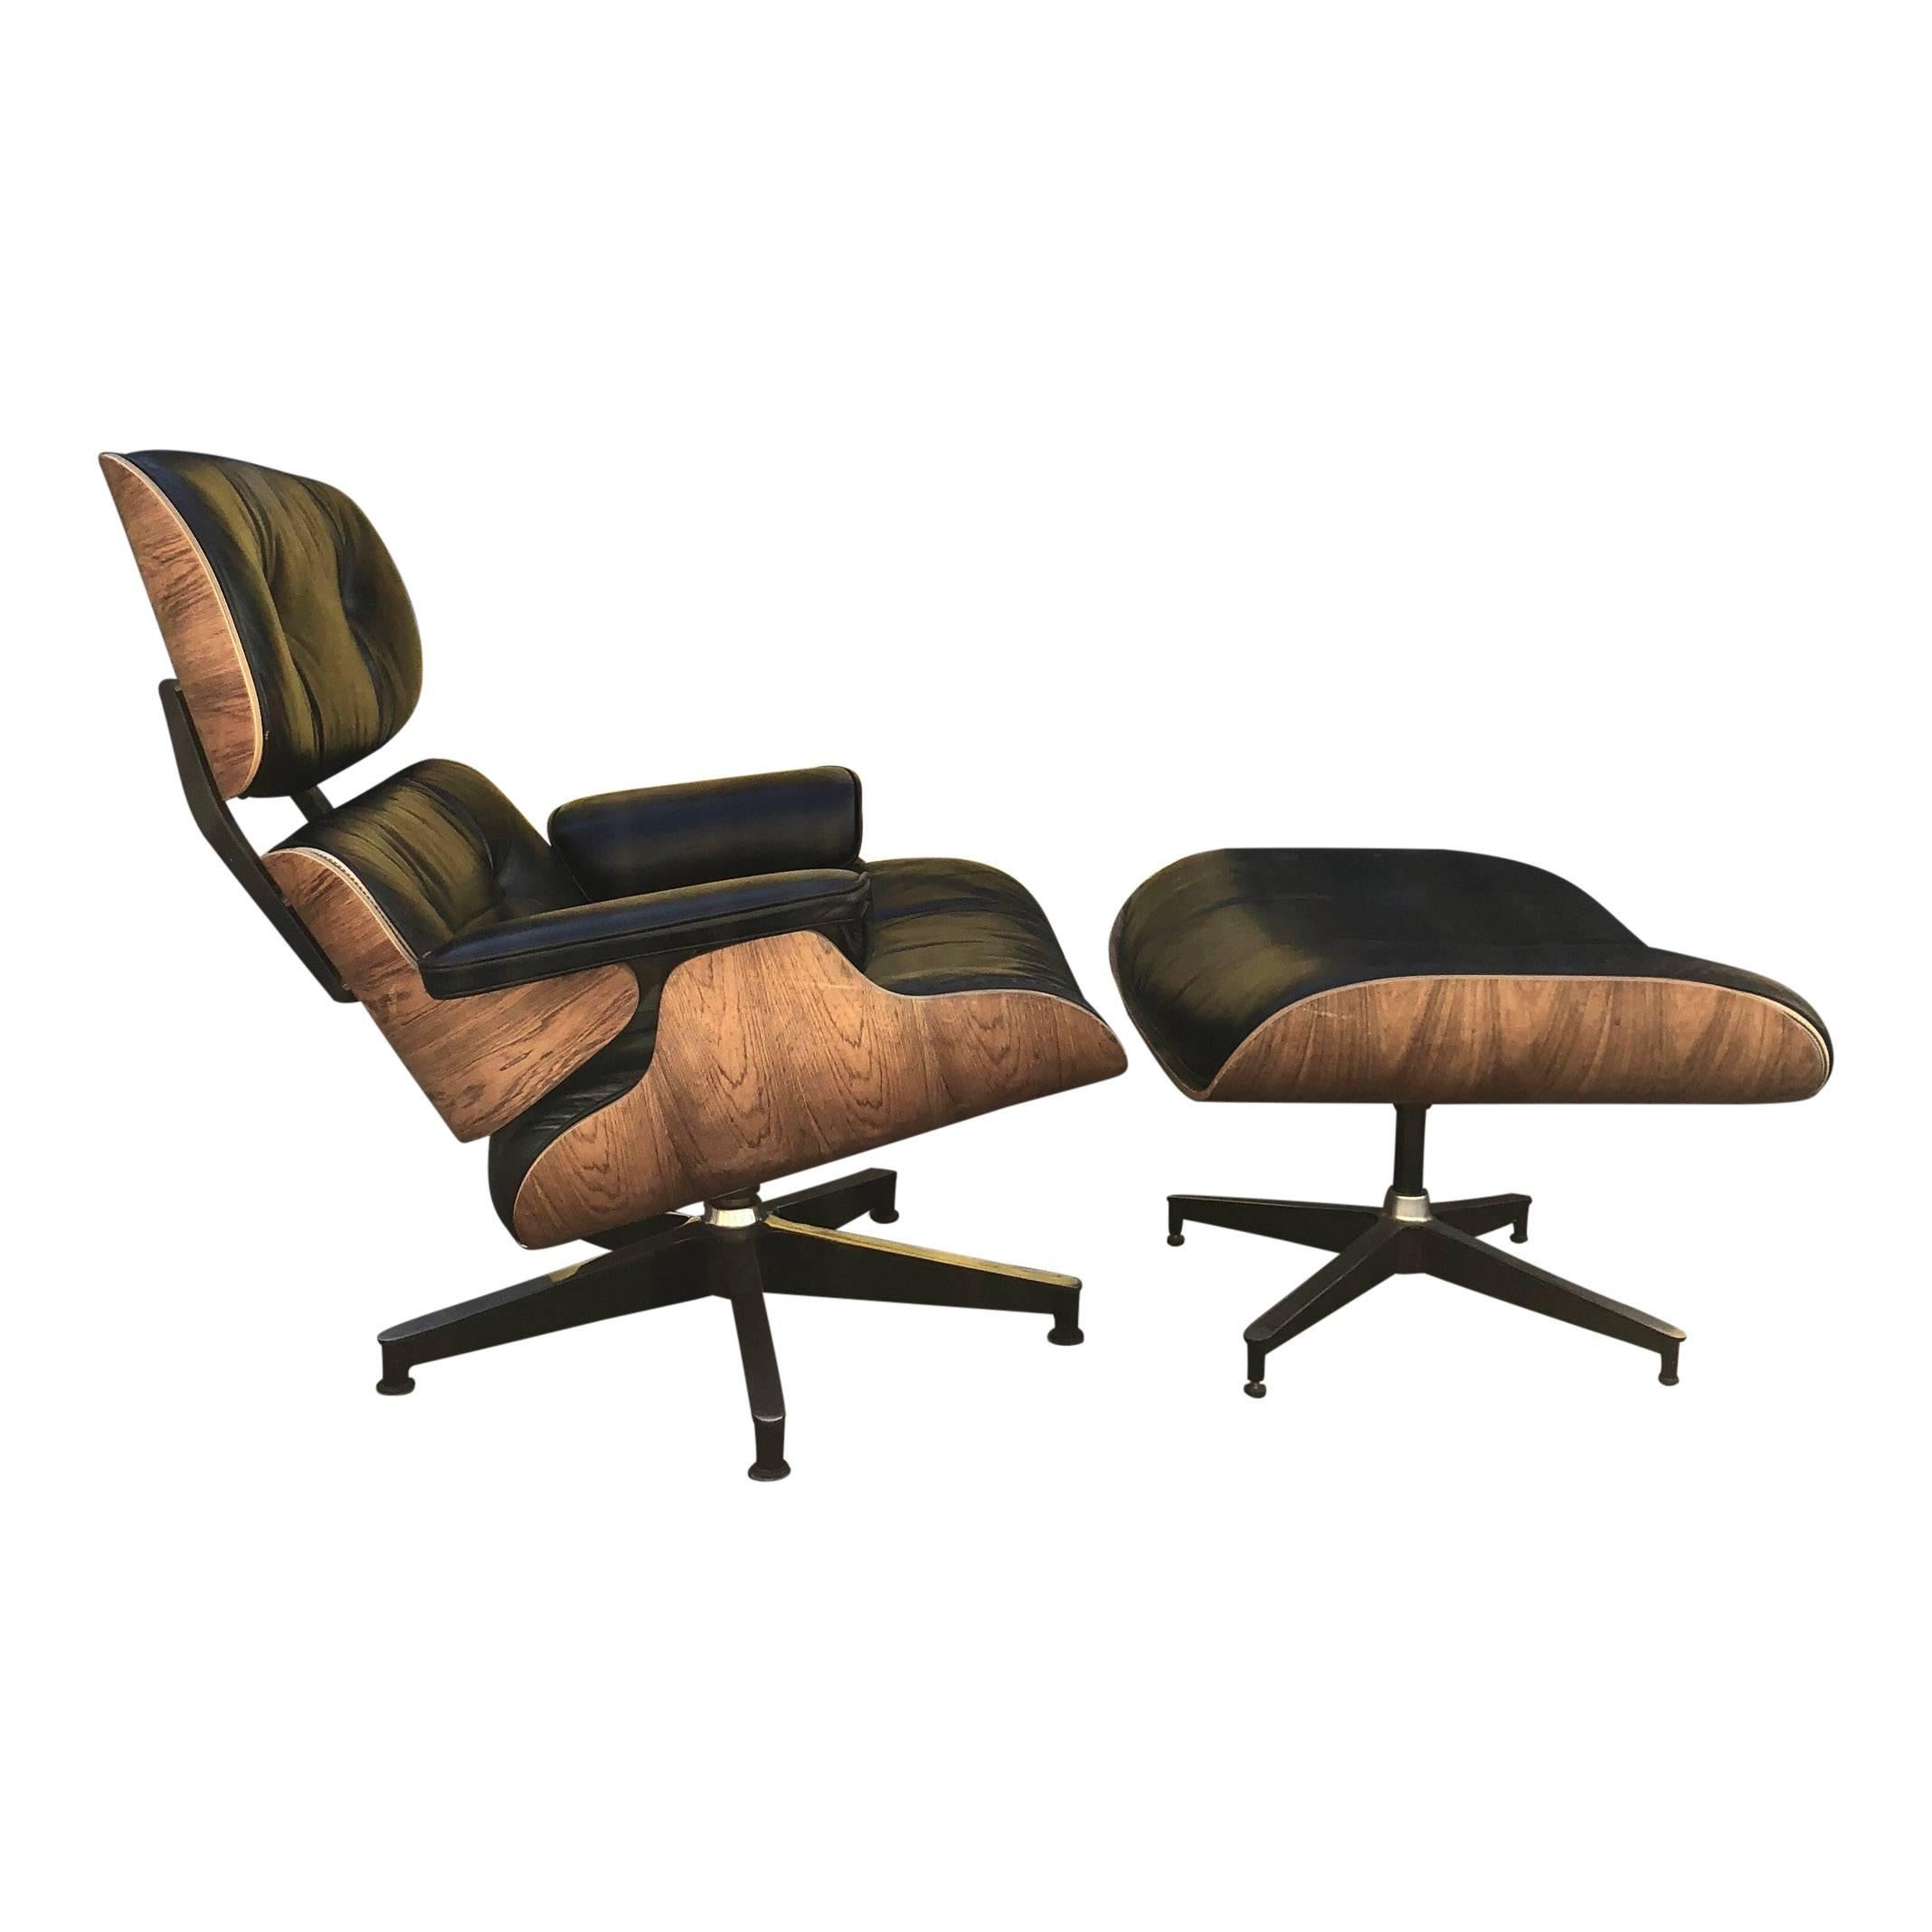 Hello collectors! 
?
Up for sale is are up to two authentic Herman Miller Eames Lounge chairs with coveted Brazilian rosewood shells. The Brazilian Rosewood shells are highly sought after by collectors because they were discontinued decades ago